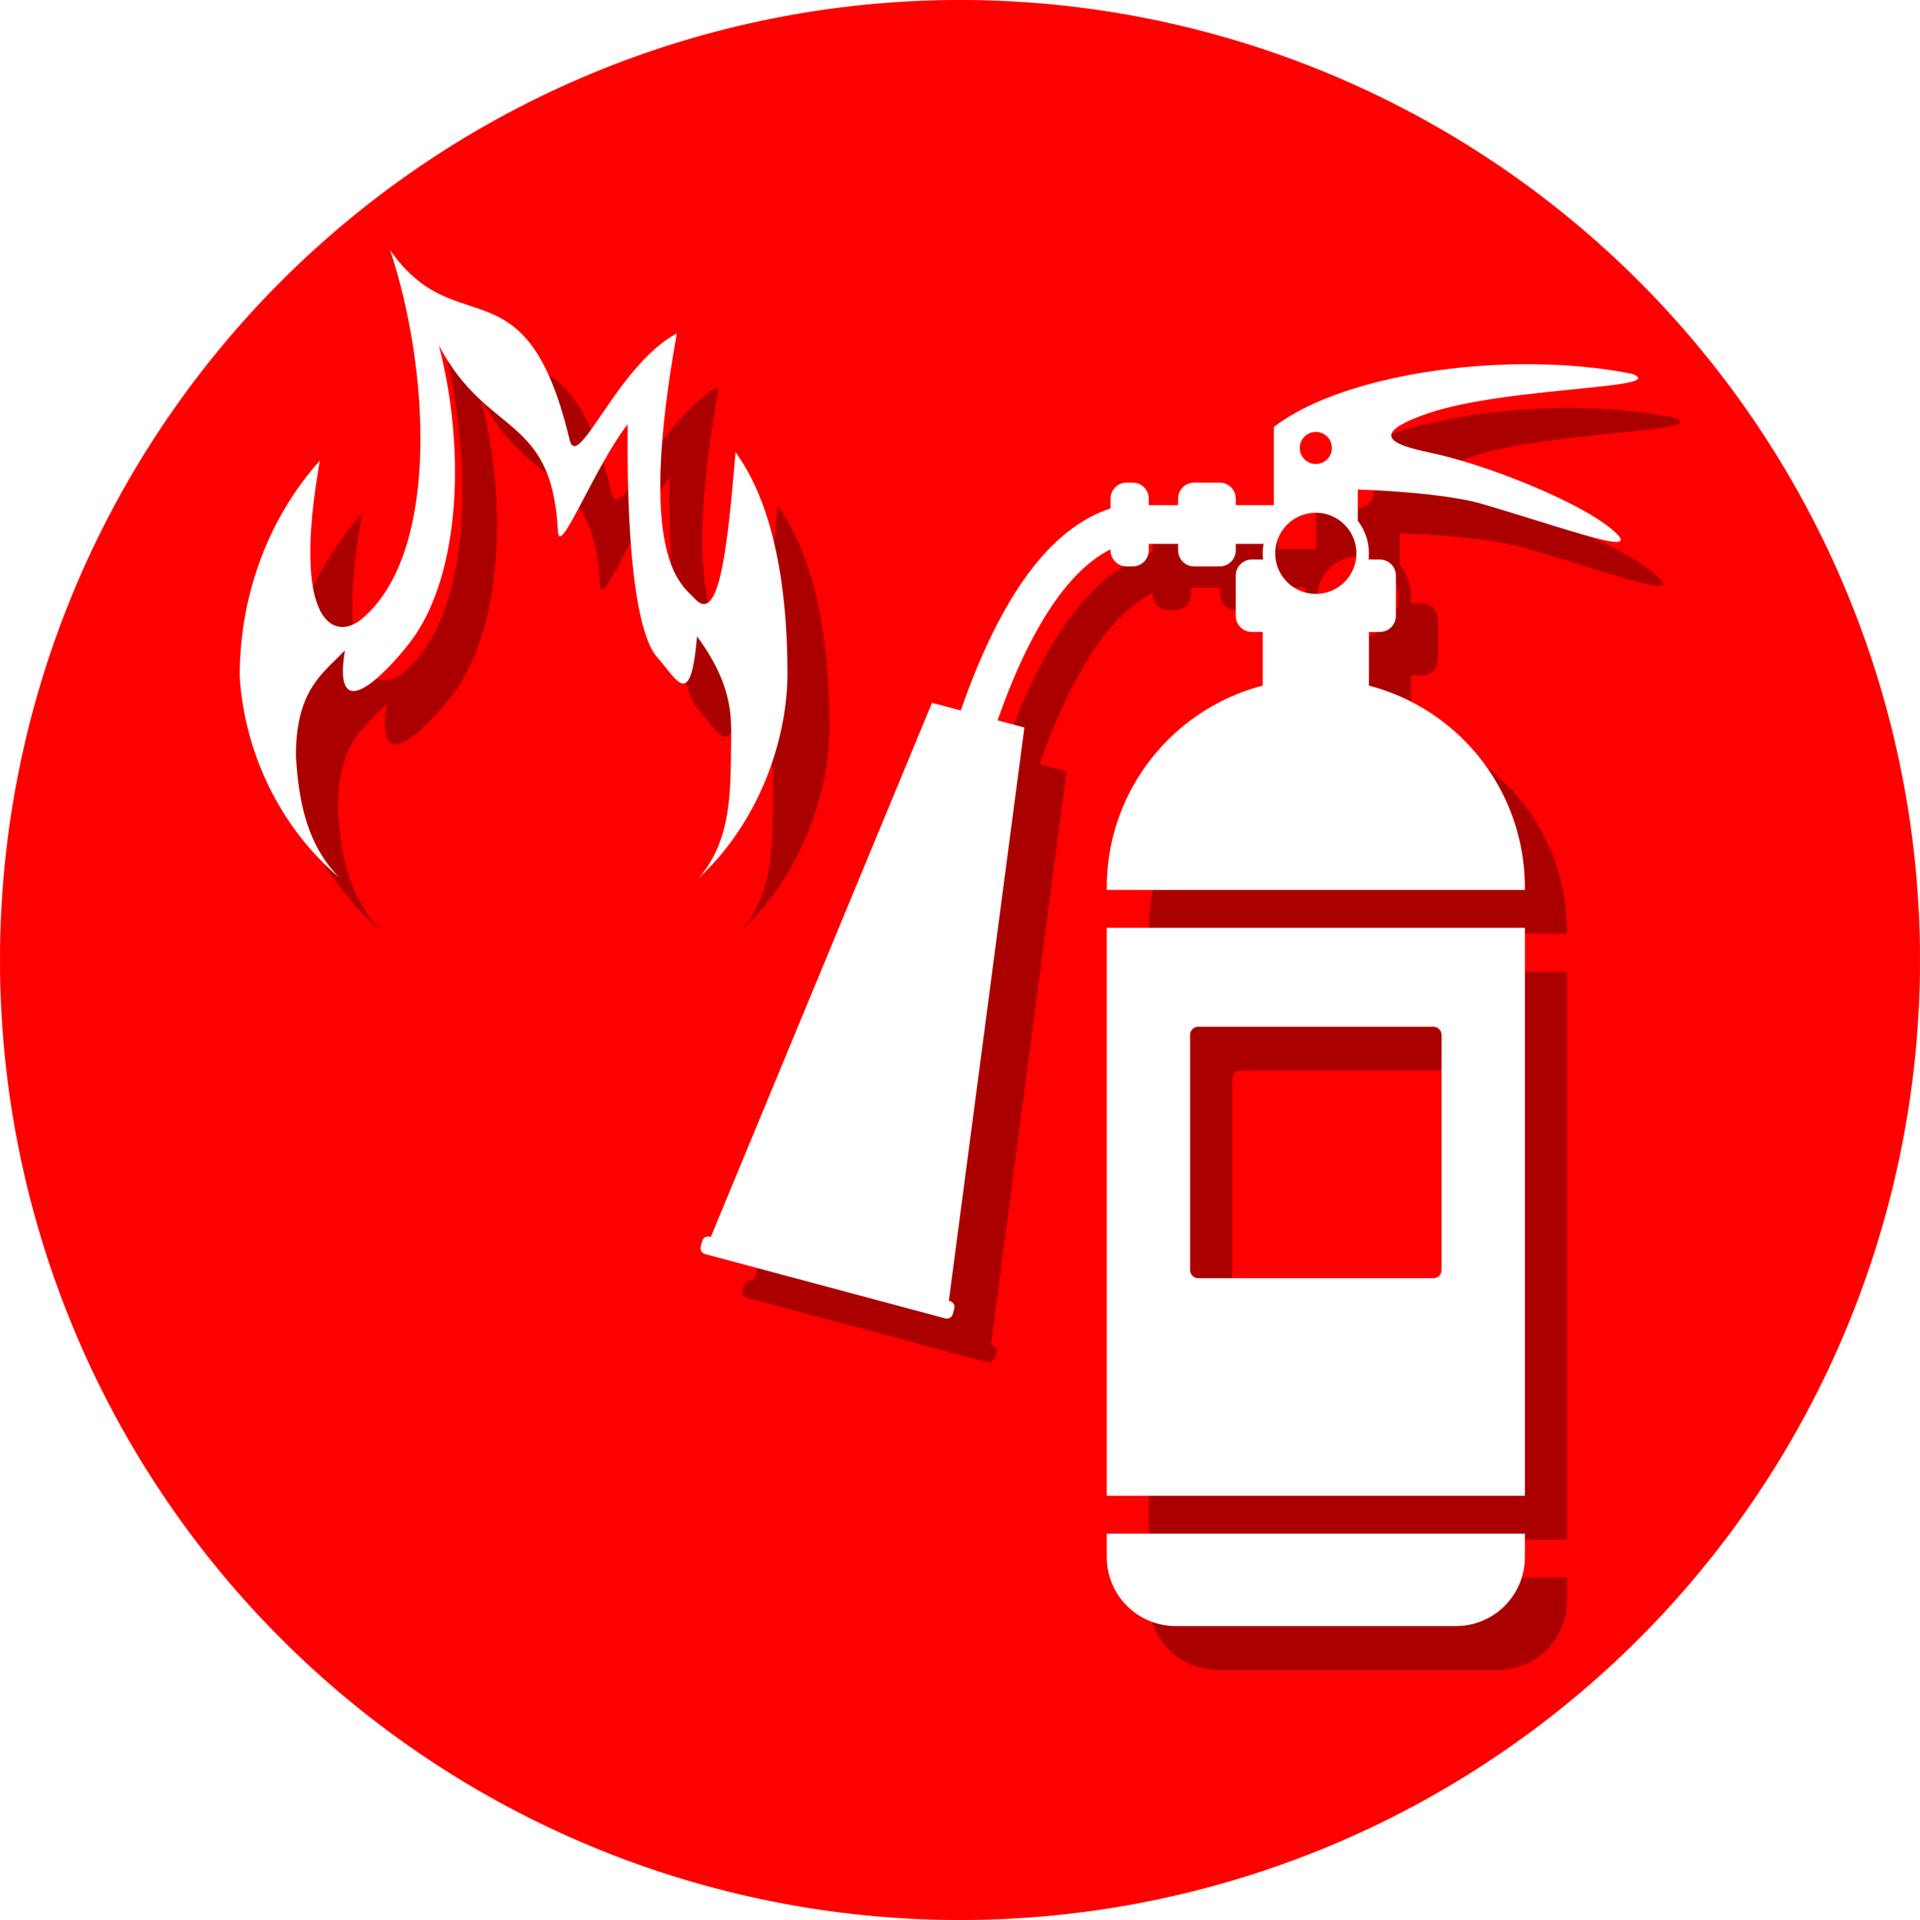 White Fire Extinguisher Rescue Tool To Extinguish Fire Paper Cut Warning Sign On Red Circle 